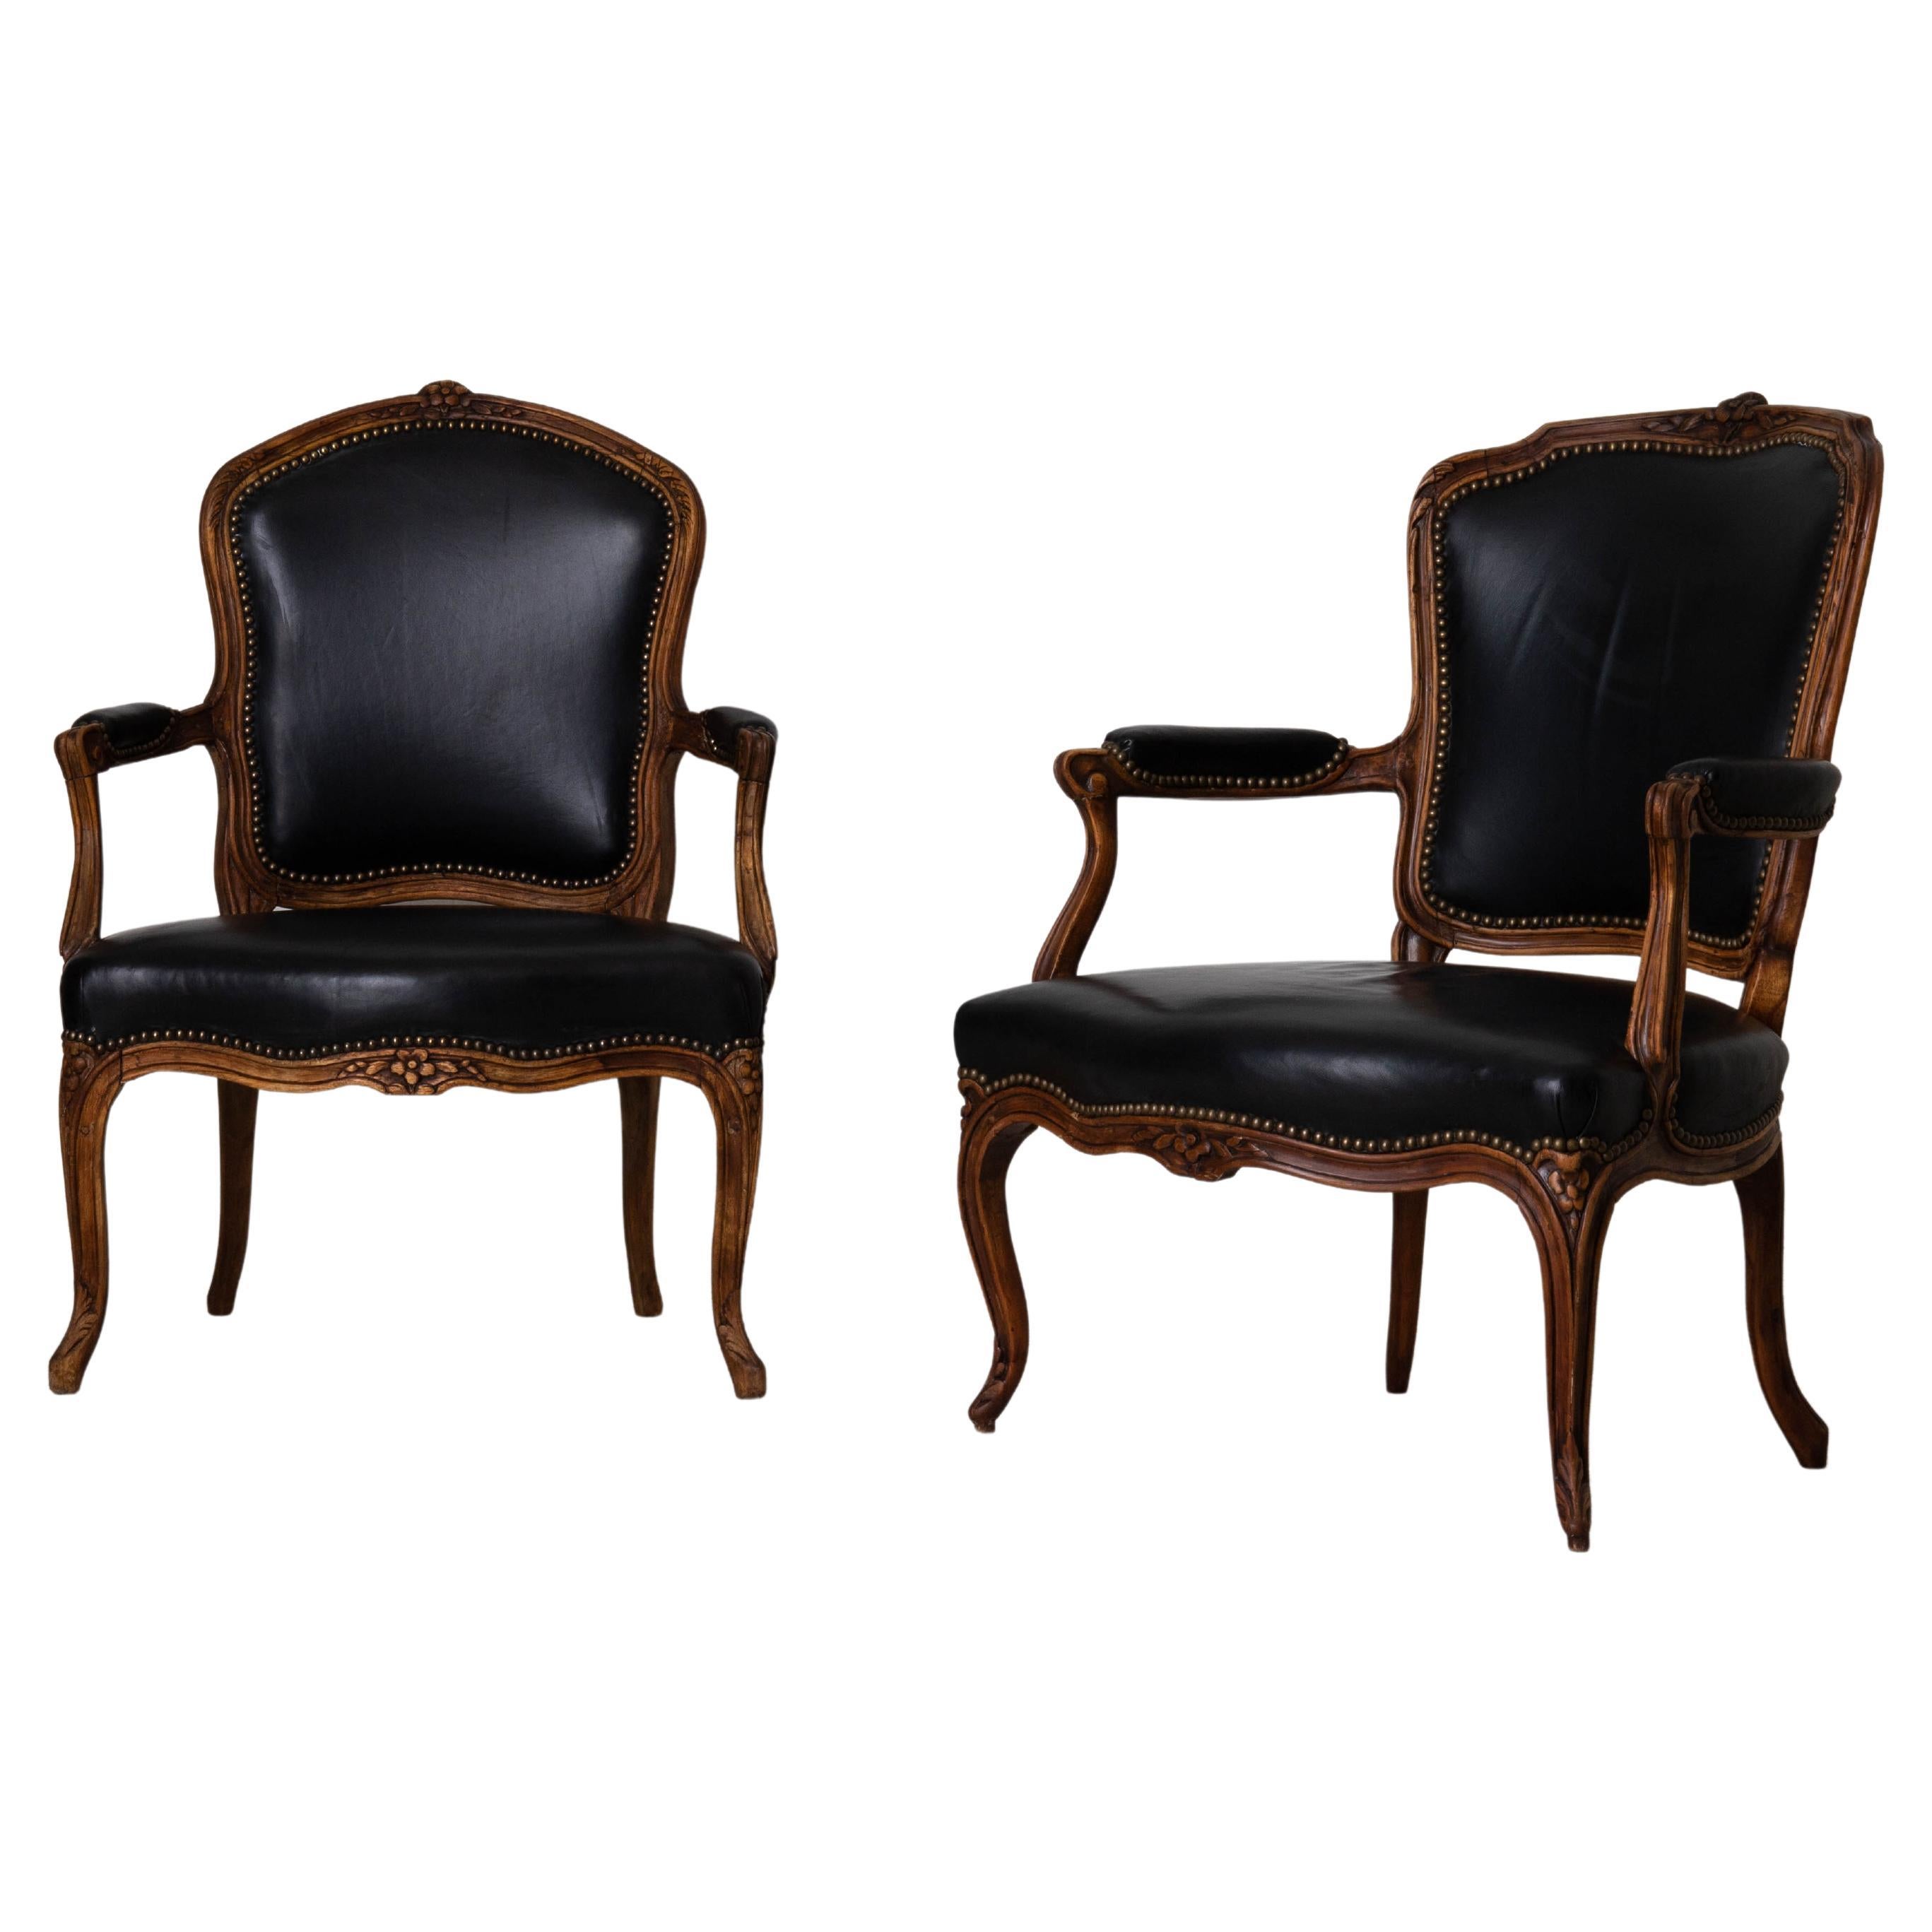 Armchairs French Rococo Period 18th Century Brown Frame Black Leather France